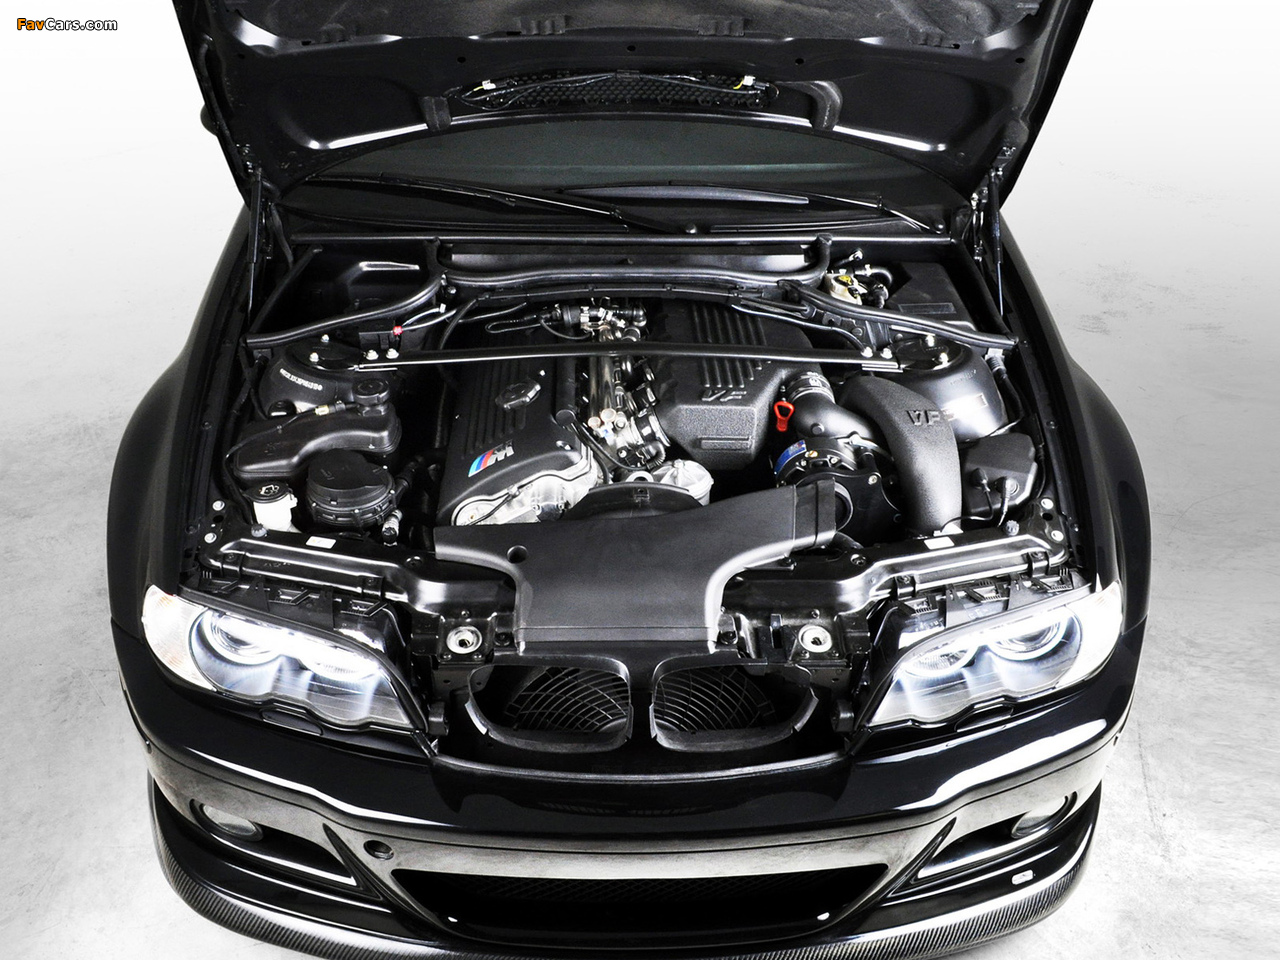 EAS BMW M3 Coupe VF480 Supercharged (E46) 2012 pictures (1280 x 960)